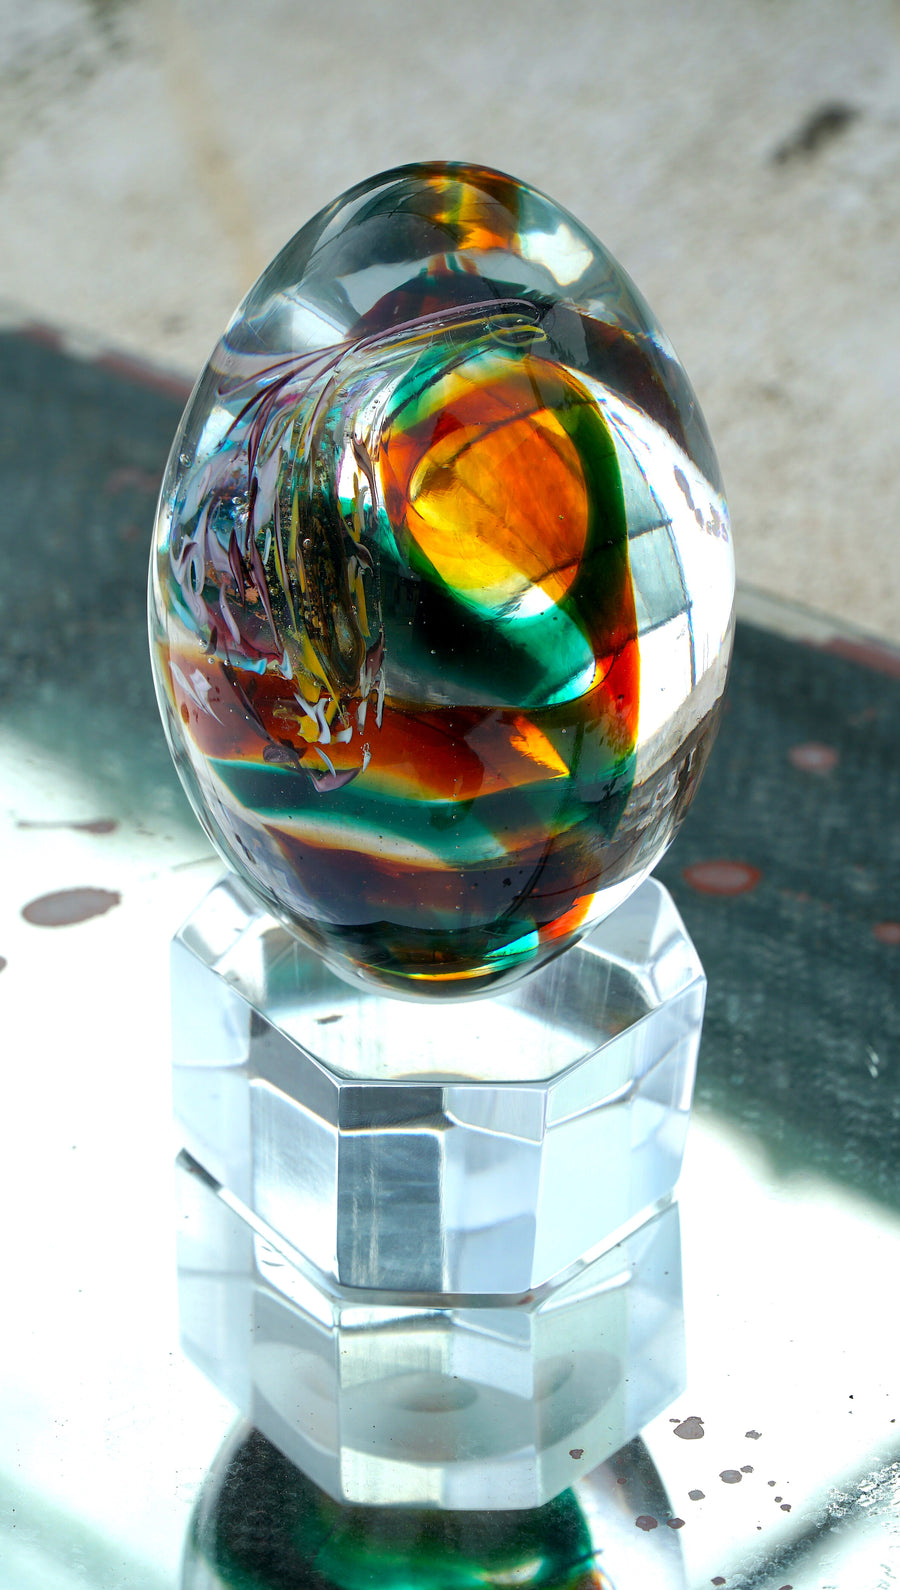 The Glass Egg is a hand sculpted unique piece with Murano Glass using the “Perle Sommerso” technique, which consists of submerging colored beads to create a multi layered effect.The work that Muriel does is considered part of "The Art of Venetian Glass Beads", a practice that comes under the Immaterial Heritage classification granted by UNESCO in January 2021.